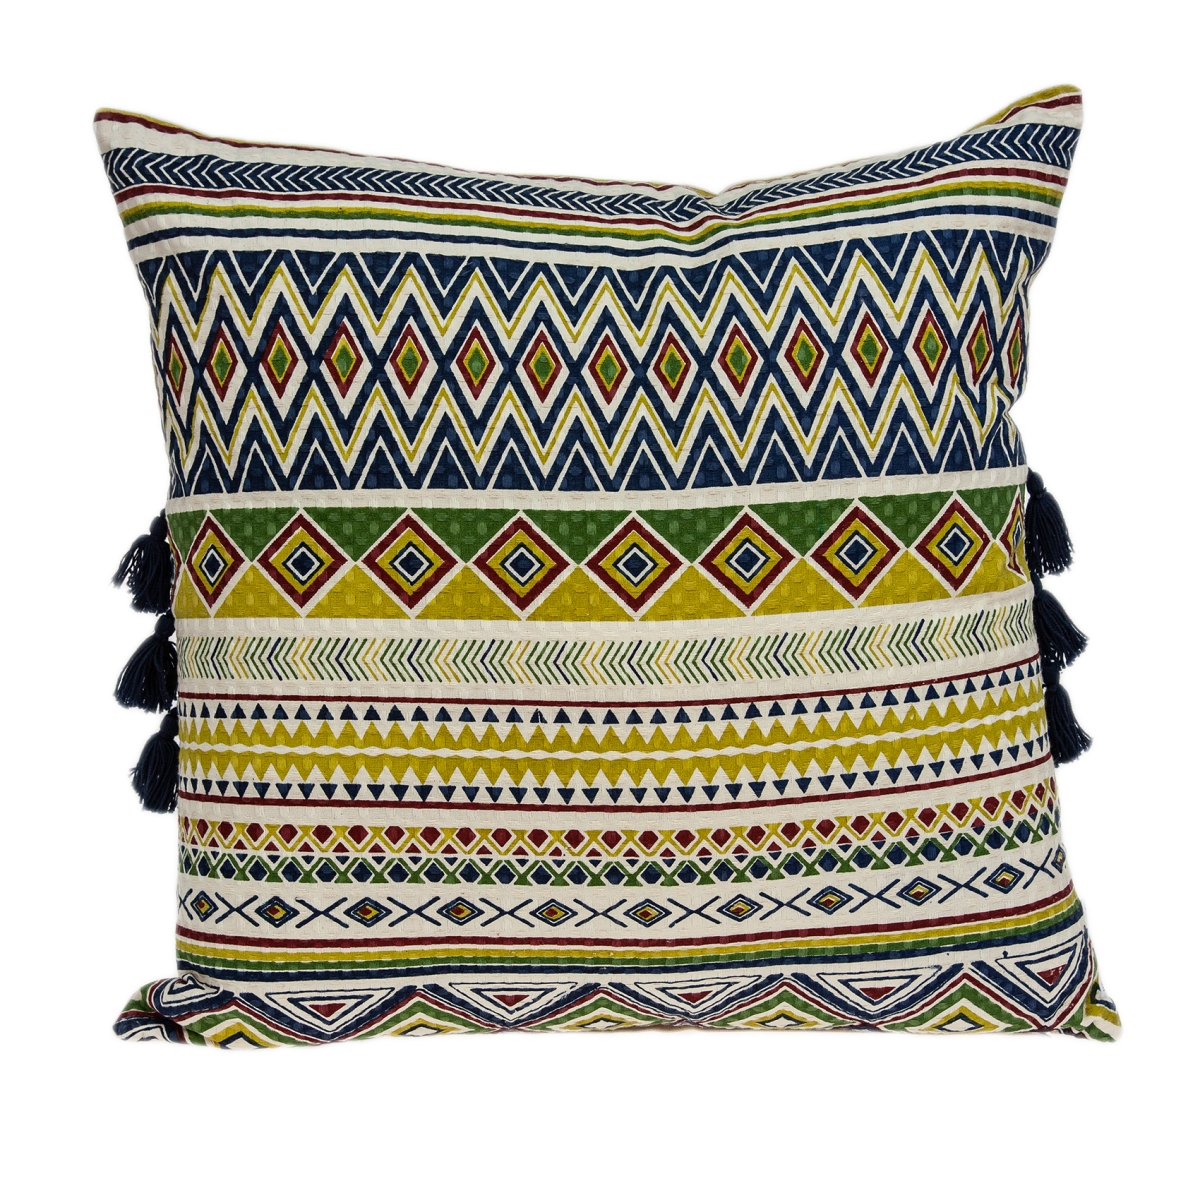 Pild11127d Irisa Multi Color Square Bohemian Pillow Cover With Down Insert - 20 X 20 X 7 In.